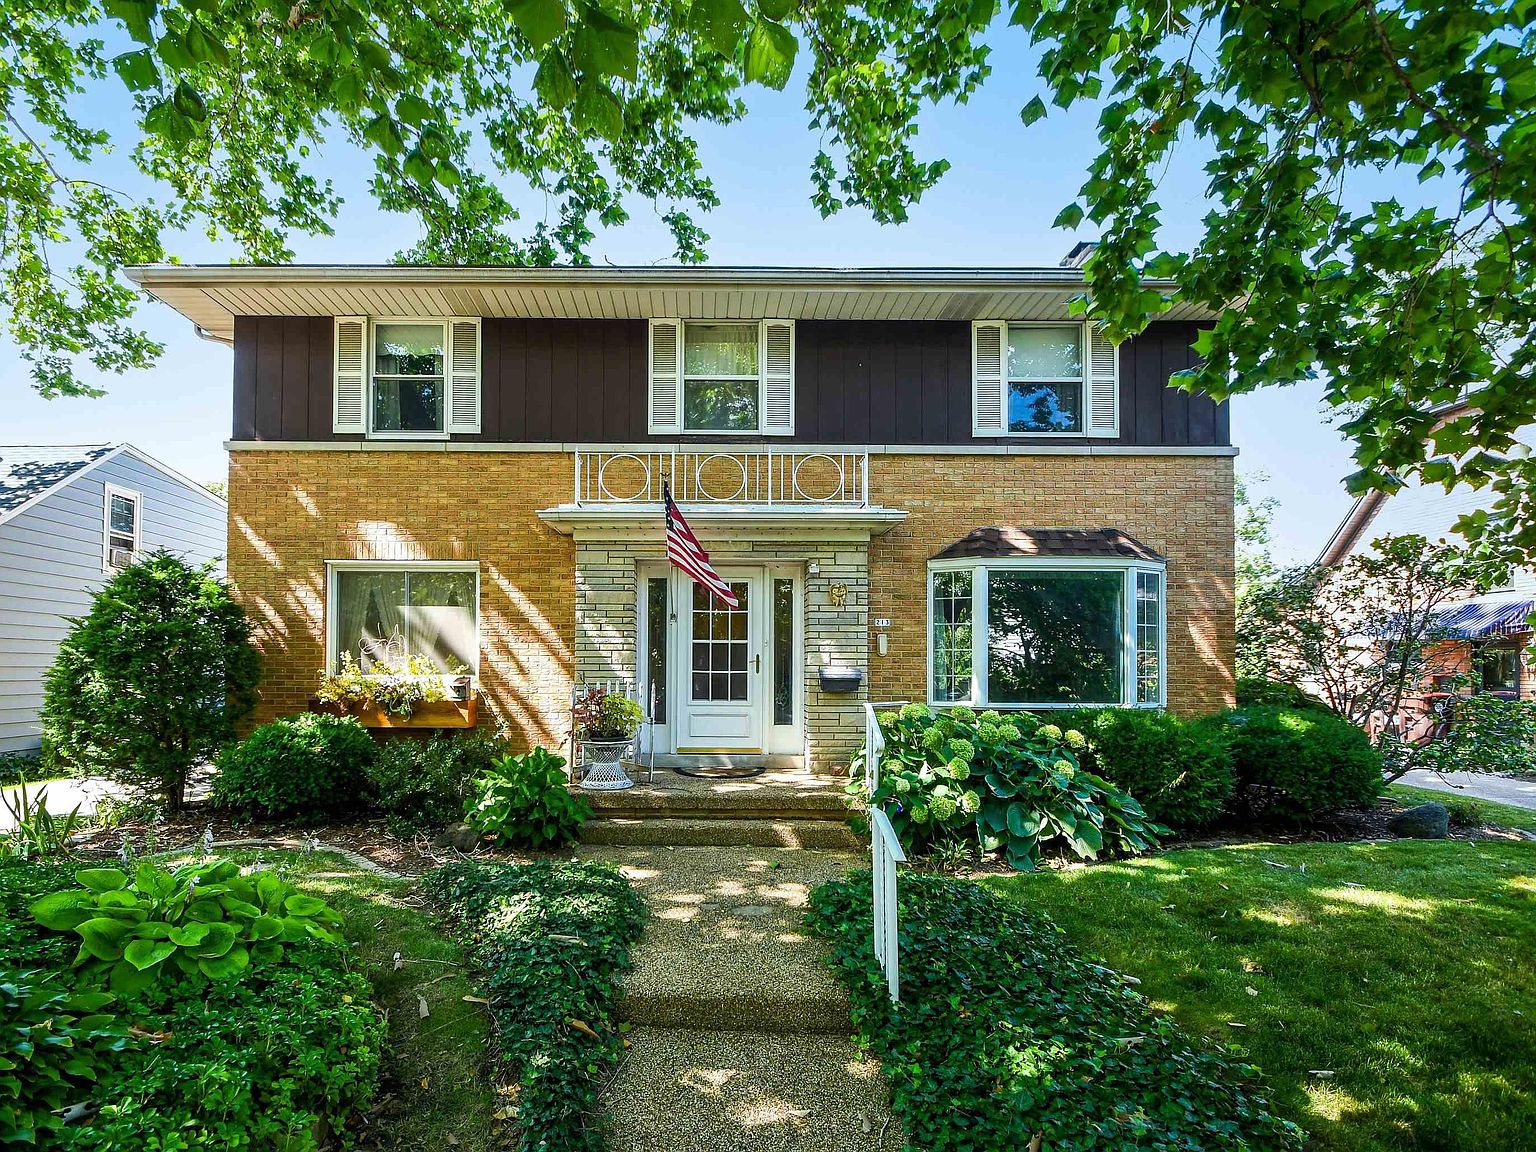 213 W Crestwood Dr, Peoria, IL 61614 | Zillow